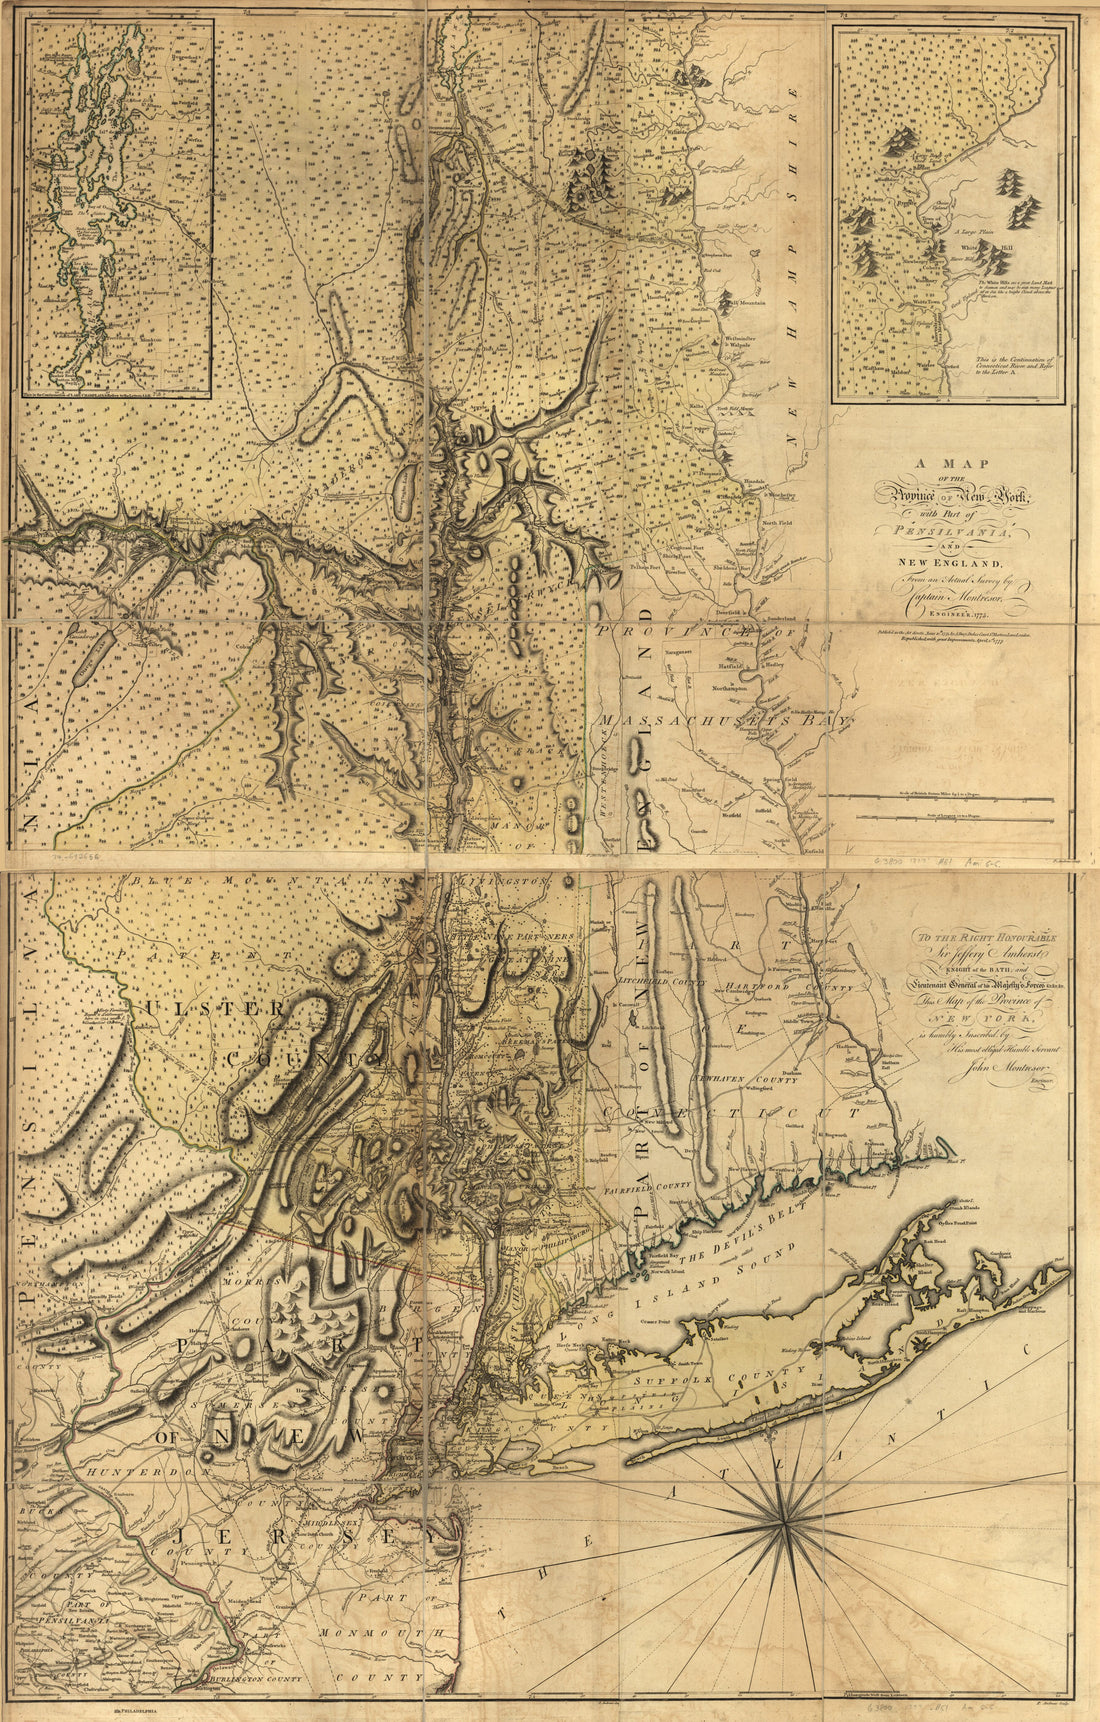 This old map of A Map of the Province of New York, With Part of Pensilvania, and New England from 1777 was created by Peter Andrews, Andrew Dury, John Montrésor in 1777